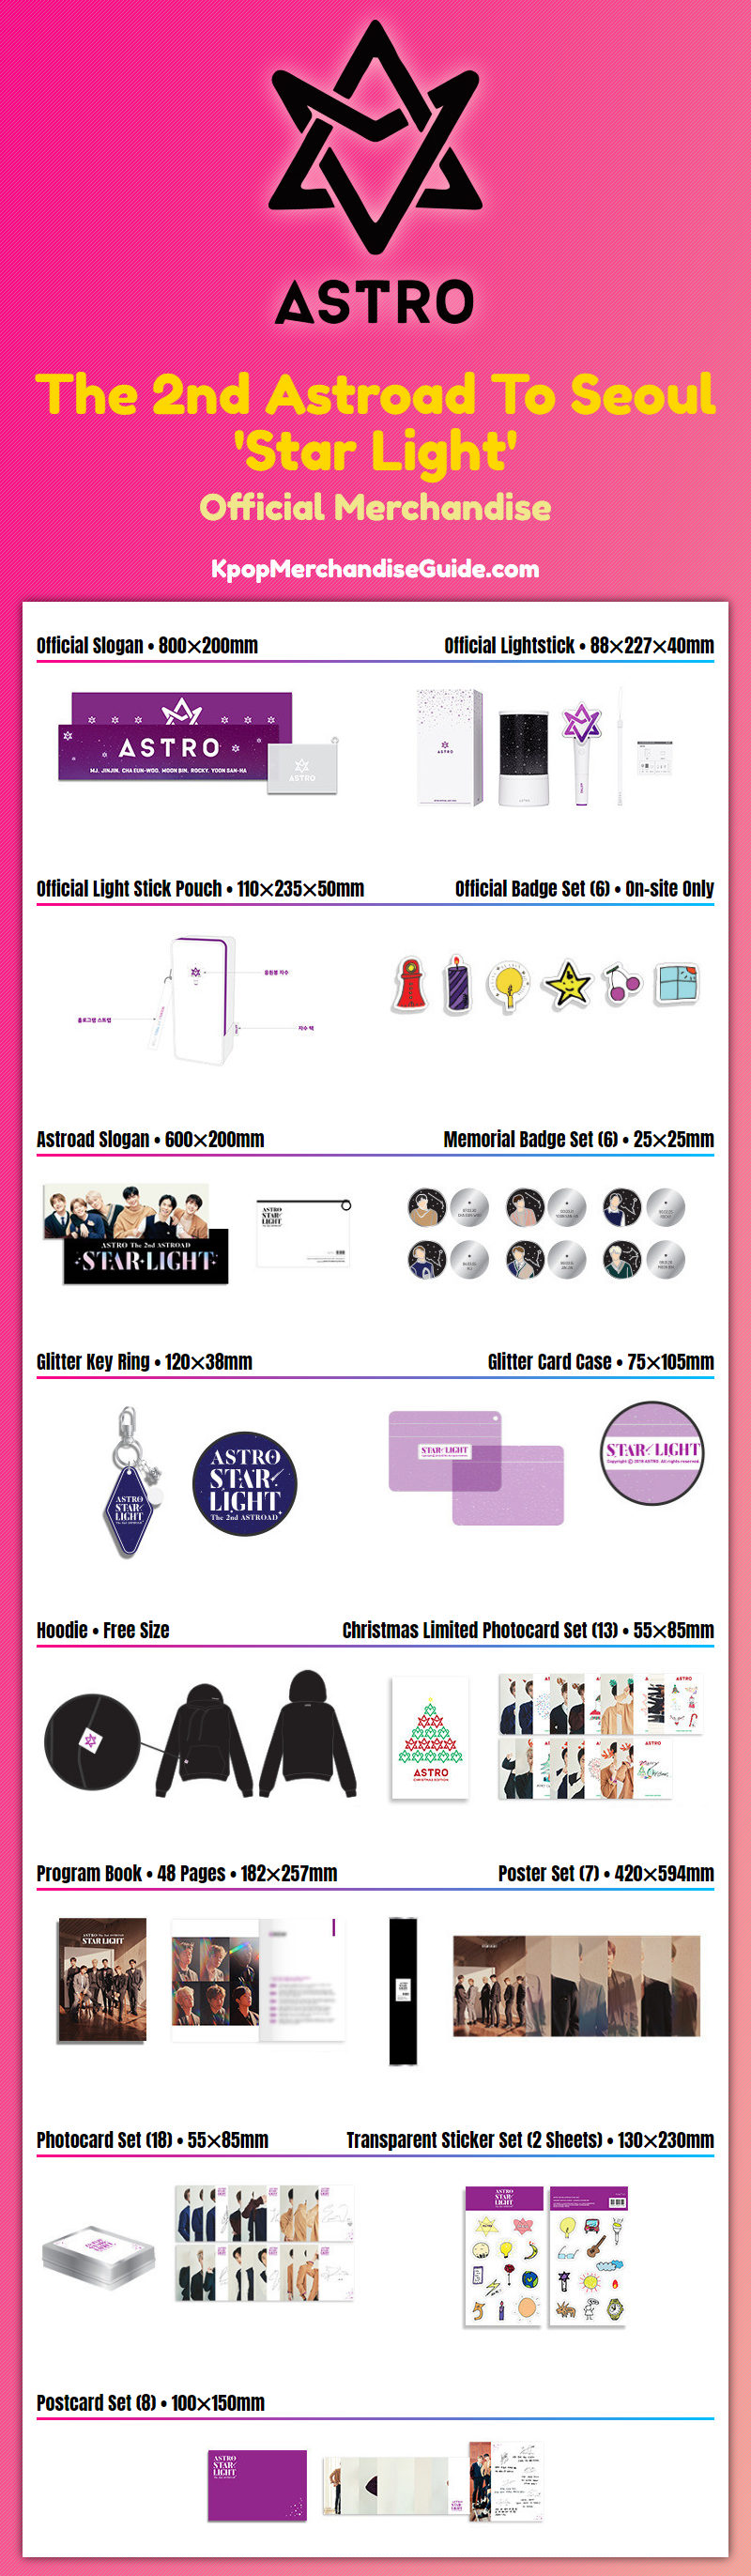 Astro The 2nd Astroad To Seoul Concert Merchandise